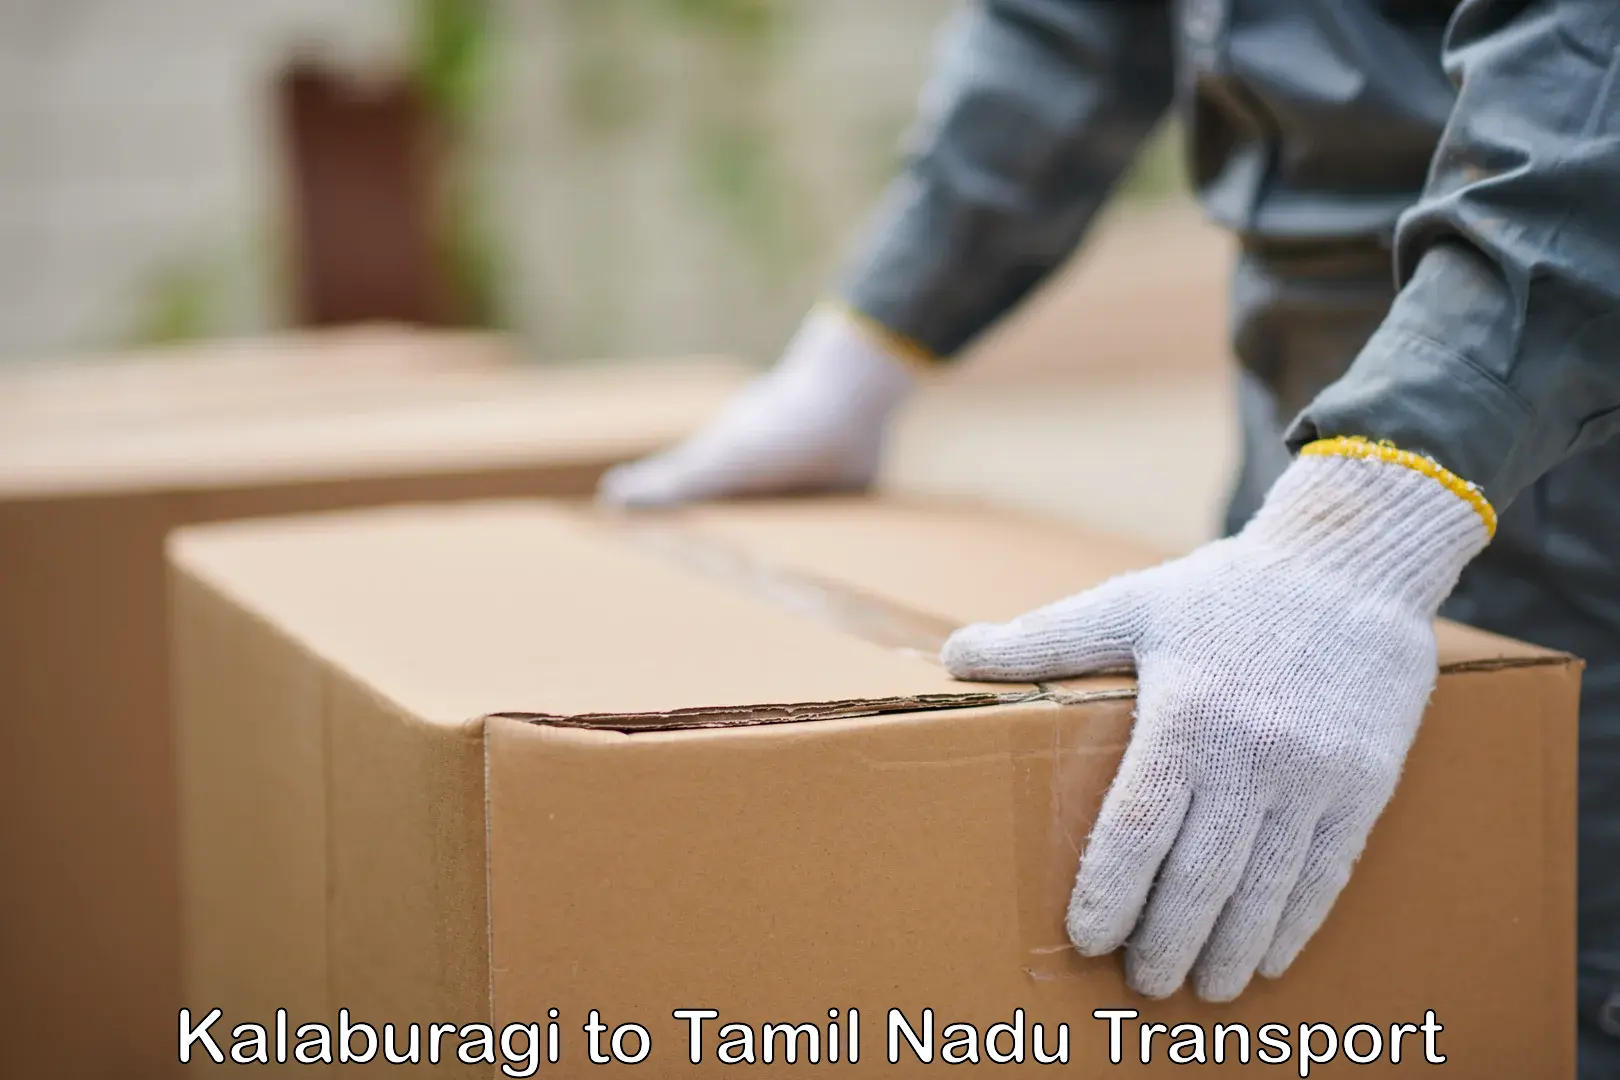 Transport shared services Kalaburagi to Shanmugha Arts Science Technology and Research Academy Thanjavur